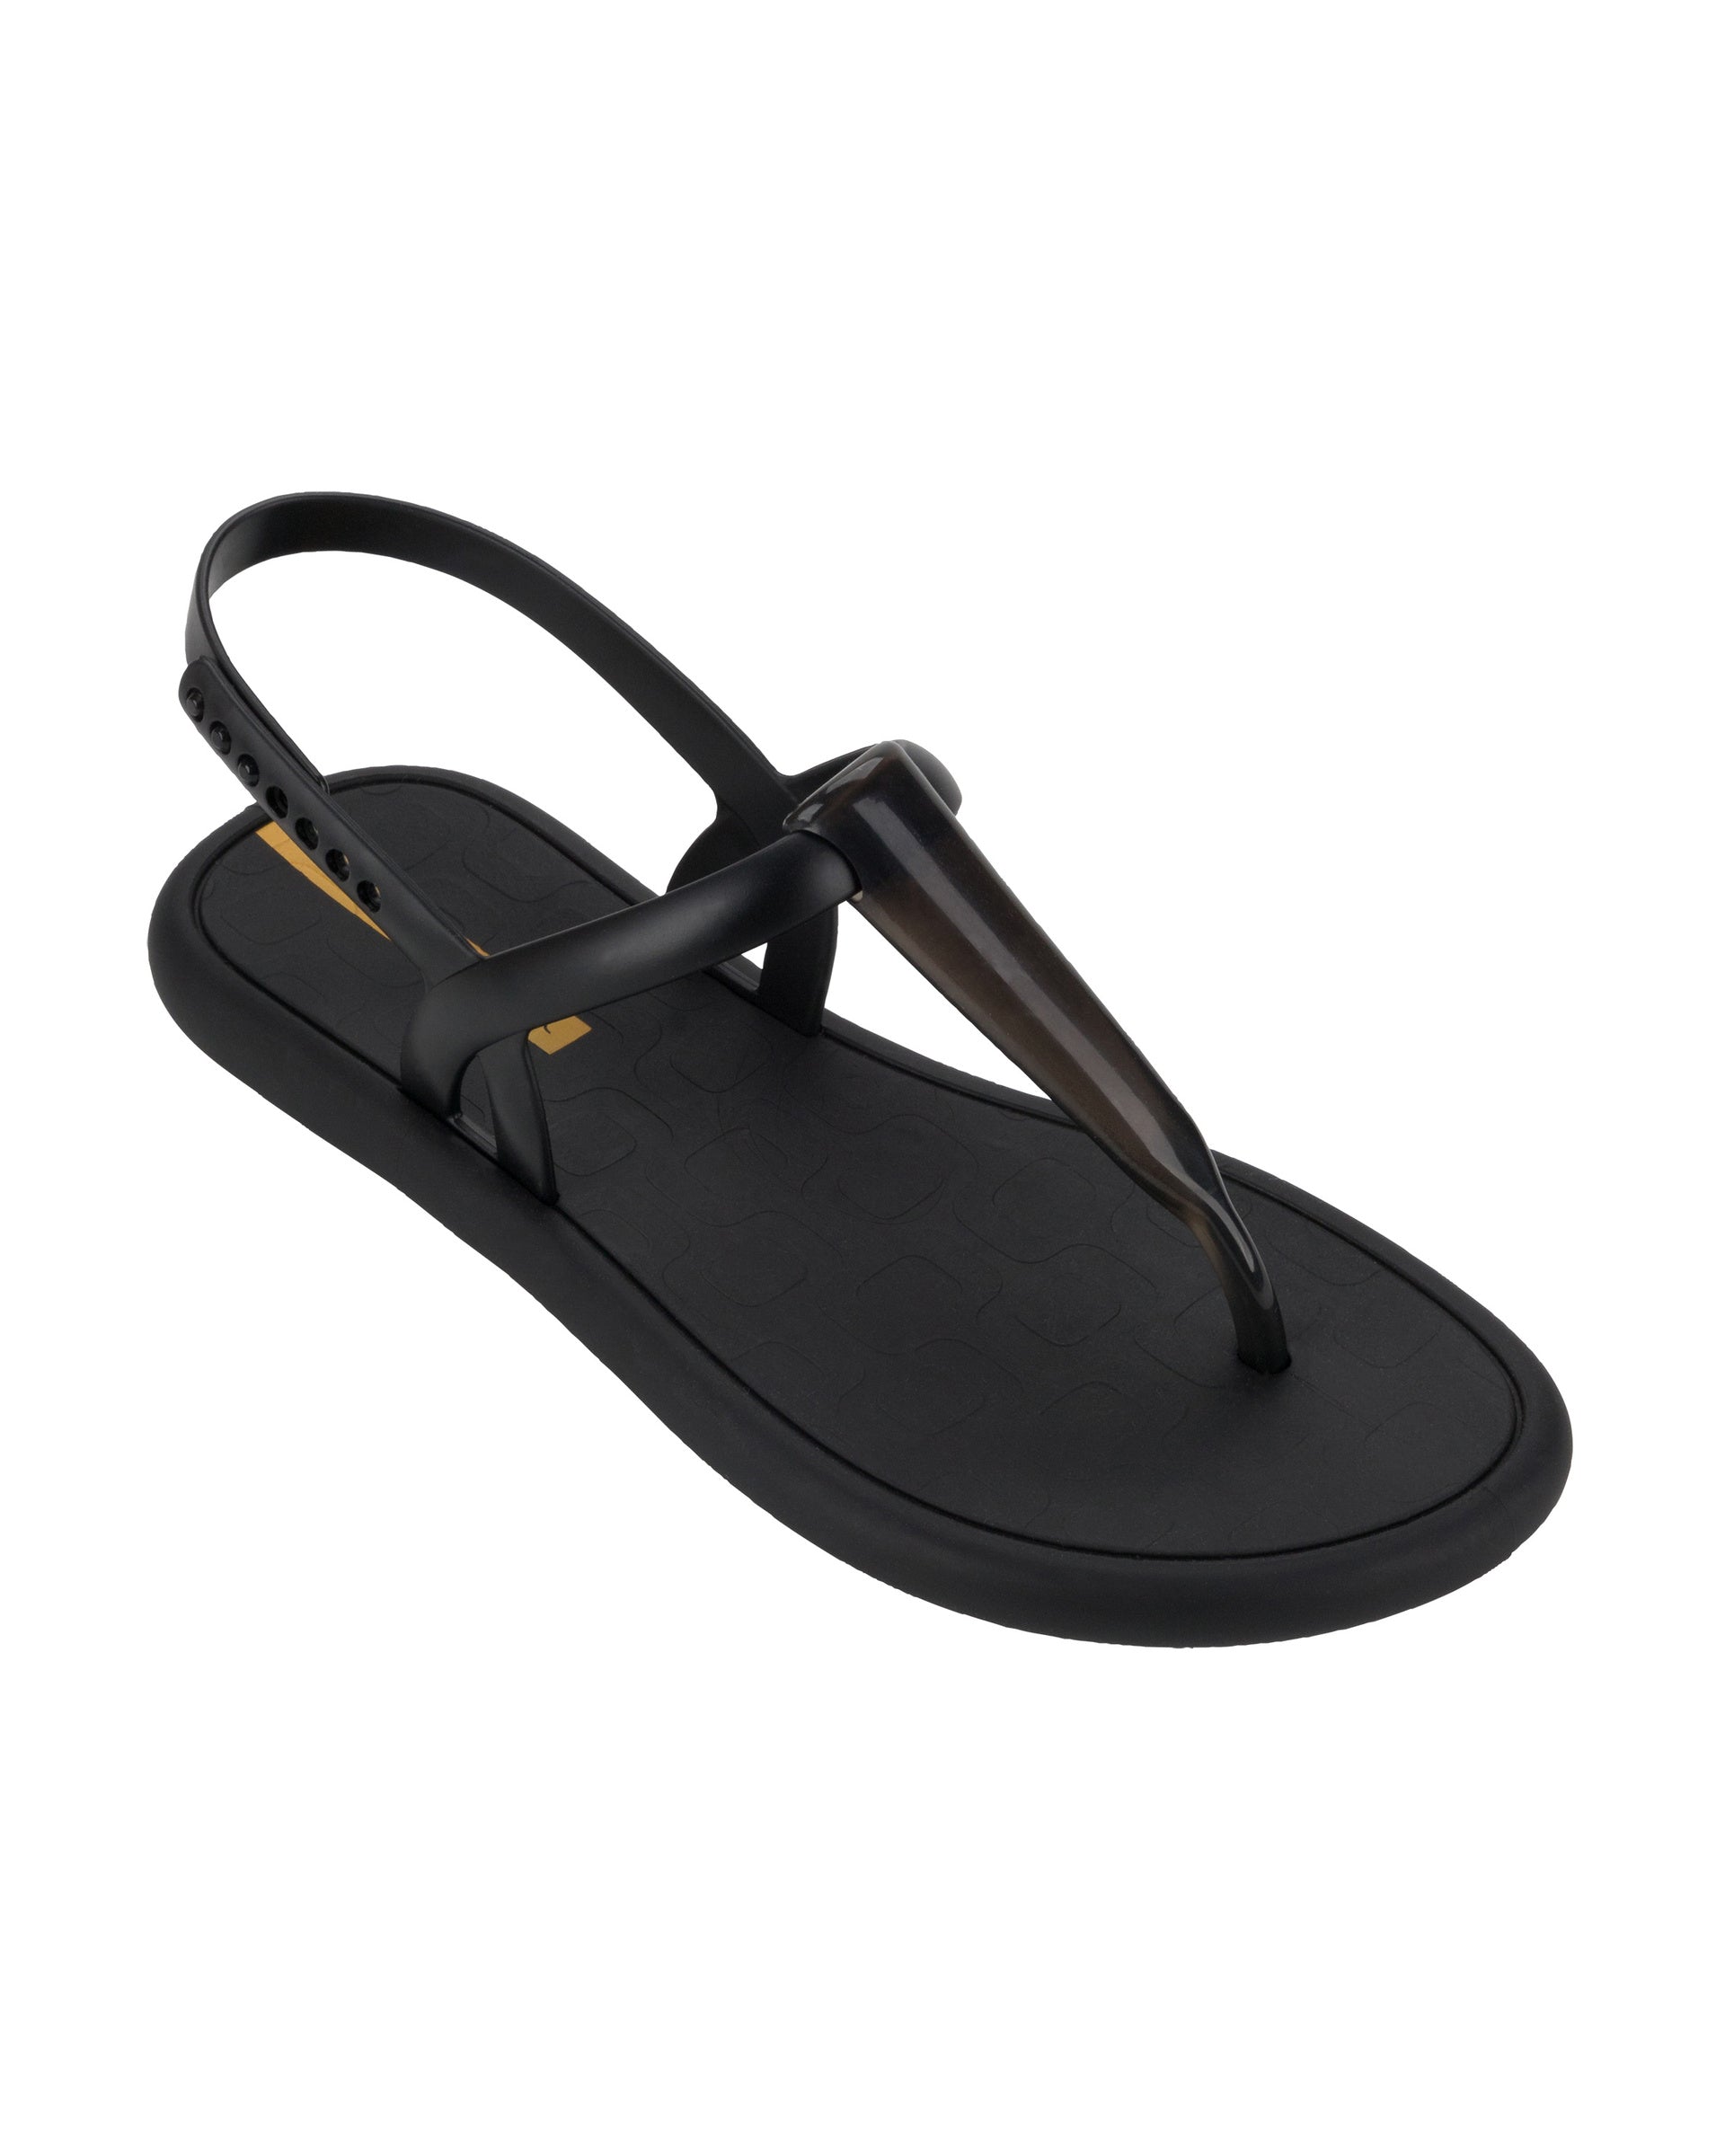 Angled view of a black Ipanema Glossy women's t-strap sandal.